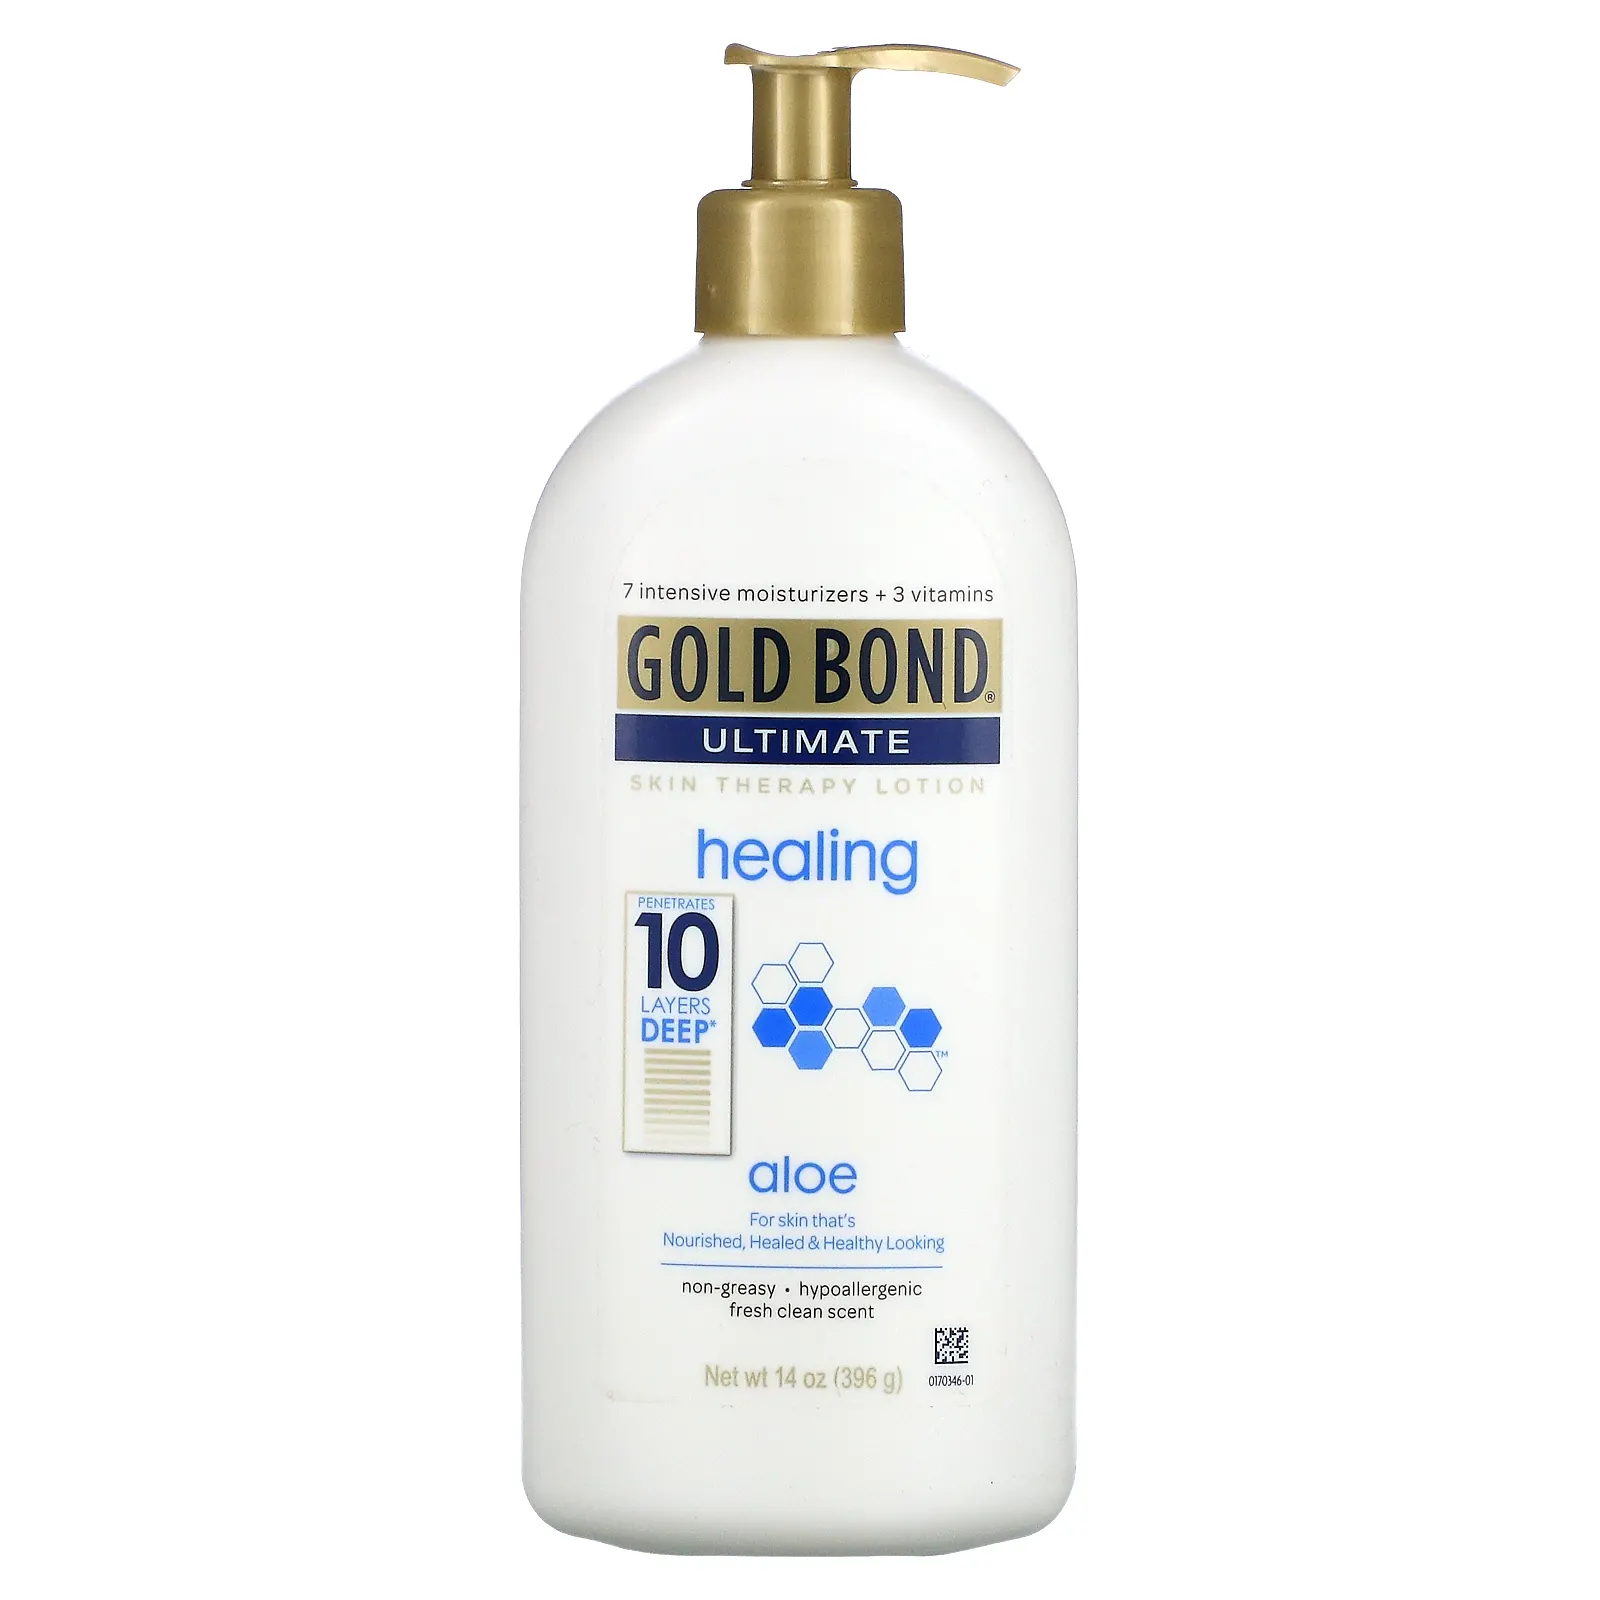 FEMMENORDIC's choice in the Aveeno vs Gold Bond comparison, the Gold Bond Healing Skin Therapy Lotion